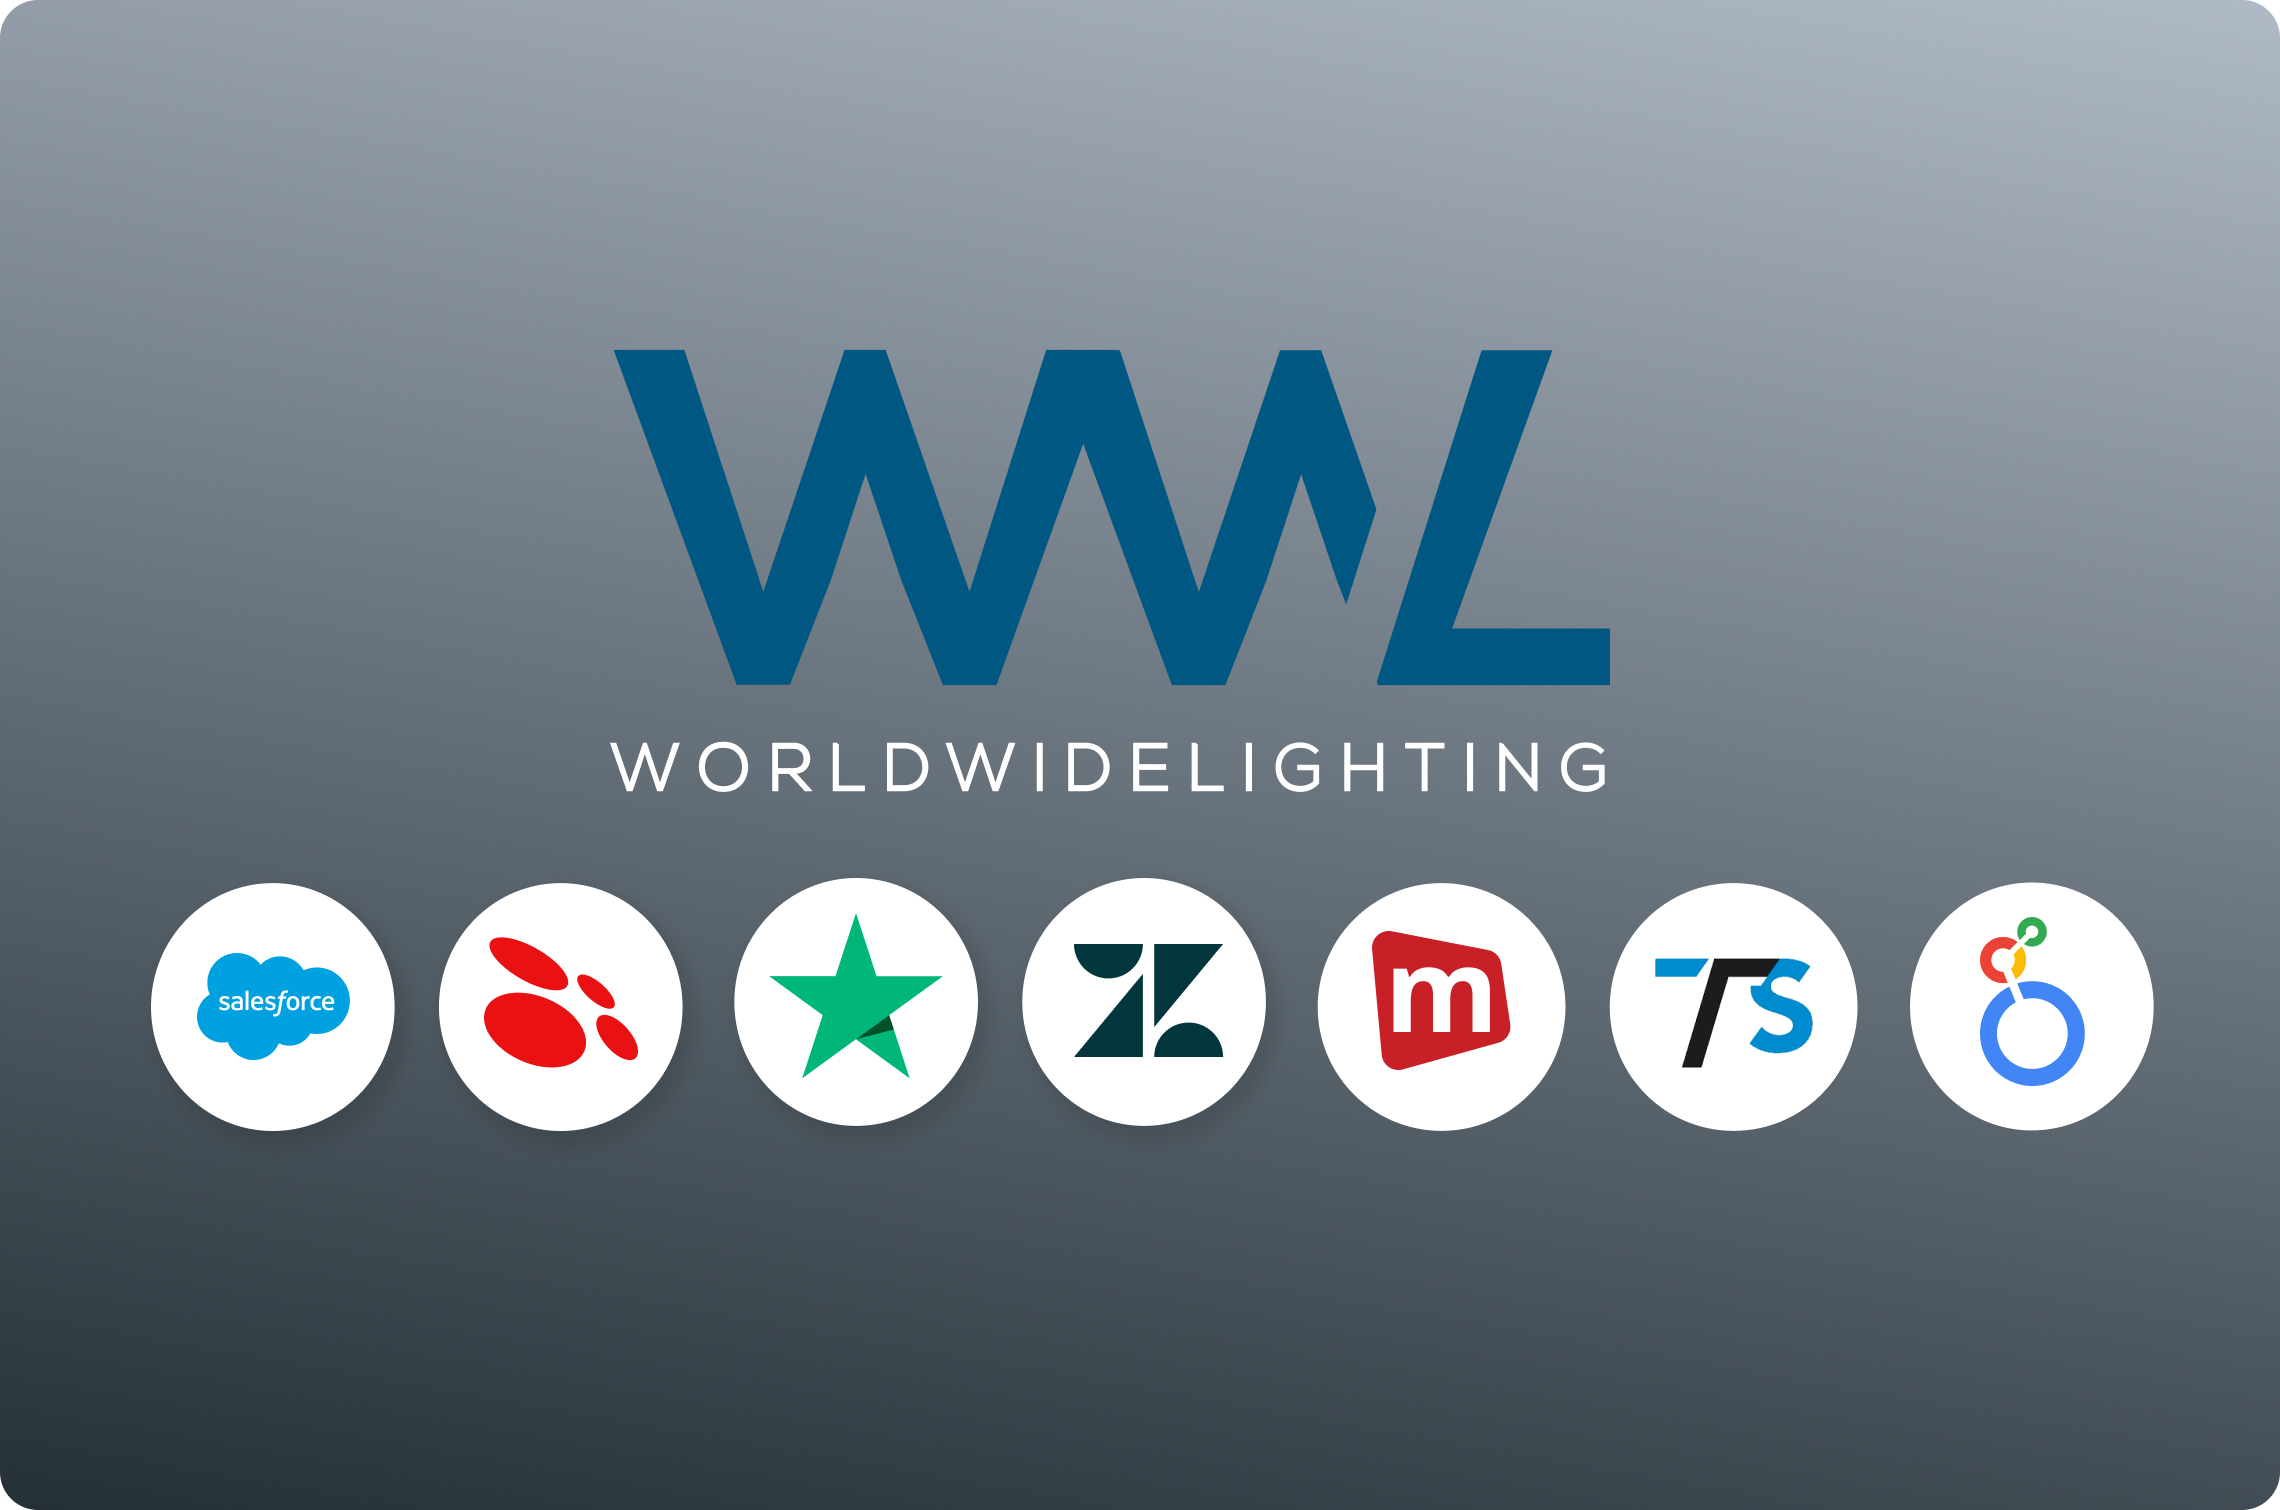 How WWL Unifies Data from 24 Eshops to Expose the “Why” Behind Sales